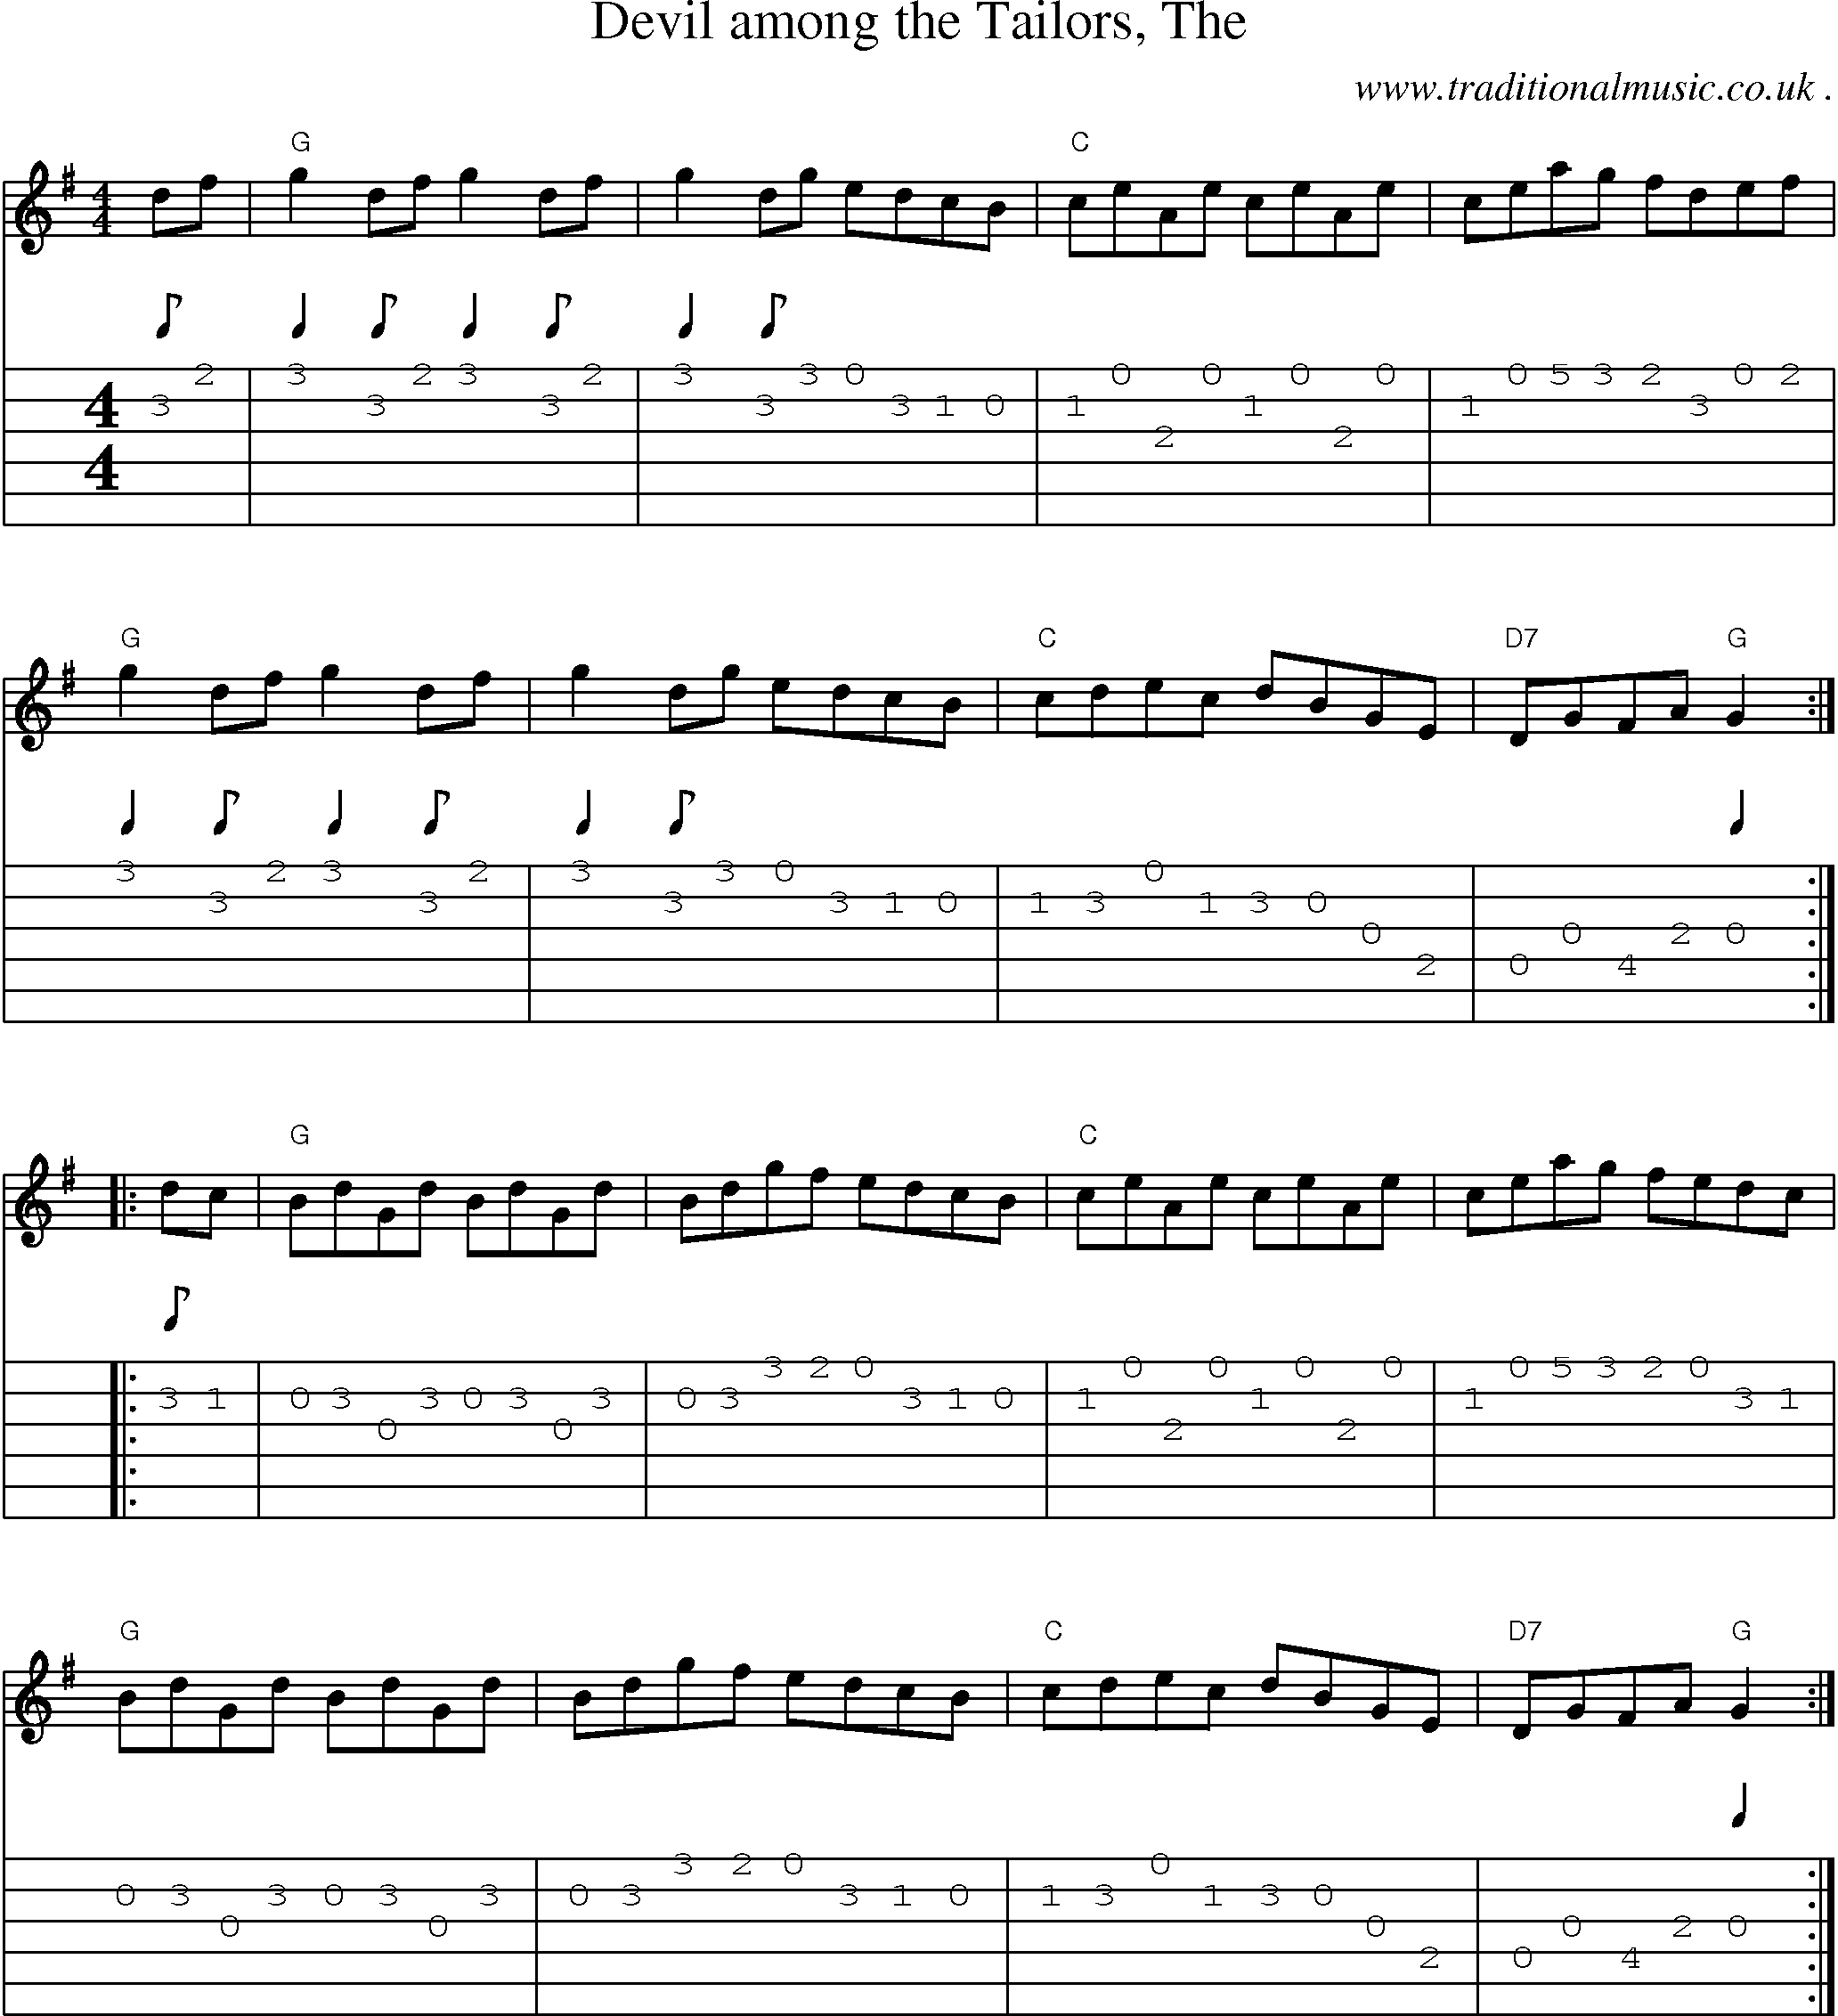 Music Score and Guitar Tabs for Devil among the Tailors The